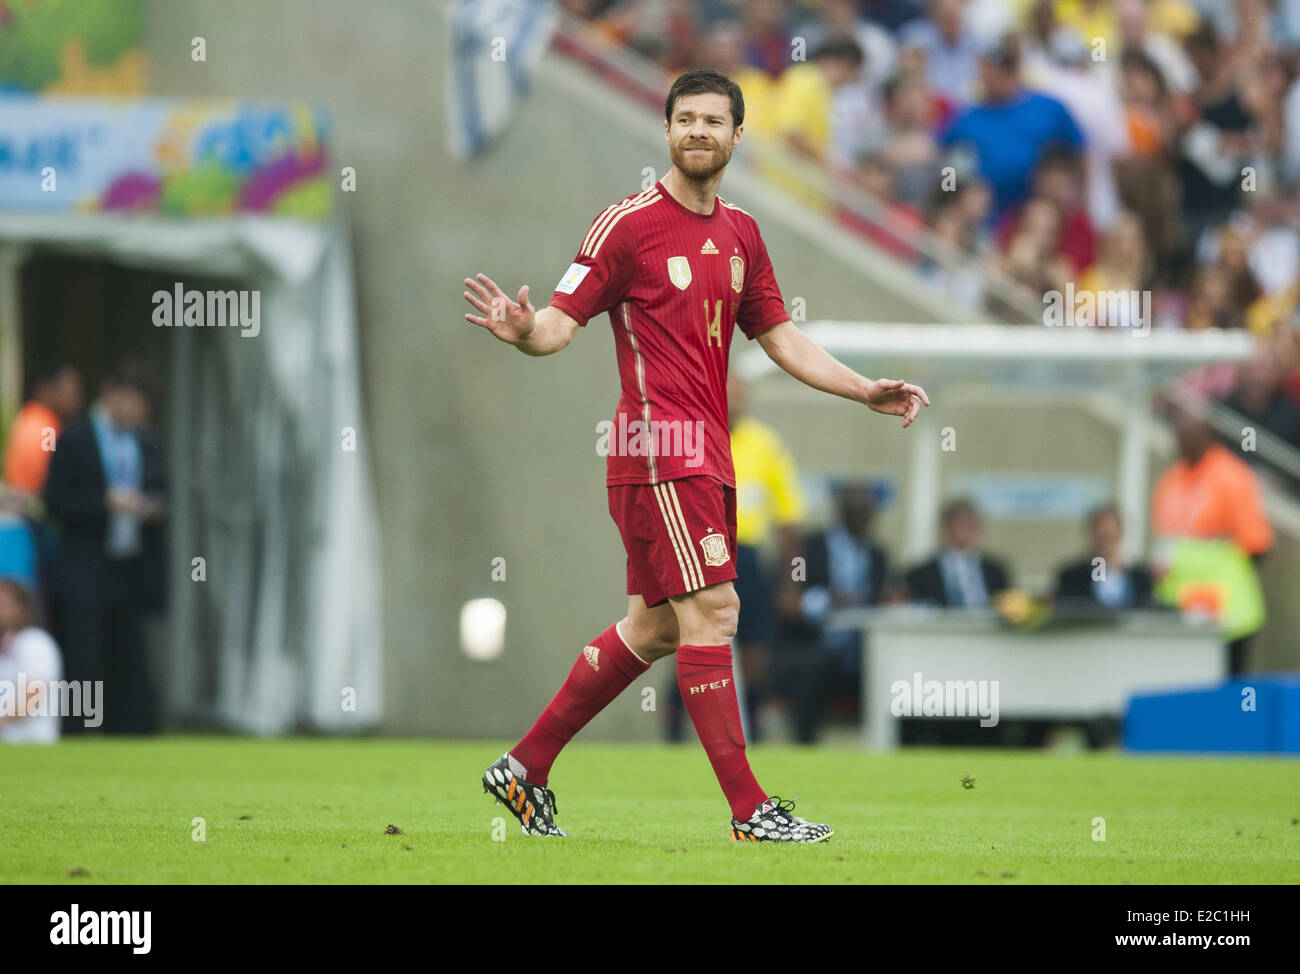 Porto Alegre, Brazil. 18th June, 2014.  Xabi Alonso in the match between Spain and Chile in the group stage of the 2014 World Cup, for the group B match at the Beira Rio stadium, on June 18, 2014  Credit:  Urbanandsport/NurPhoto/ZUMAPRESS.com/Alamy Live News Stock Photo